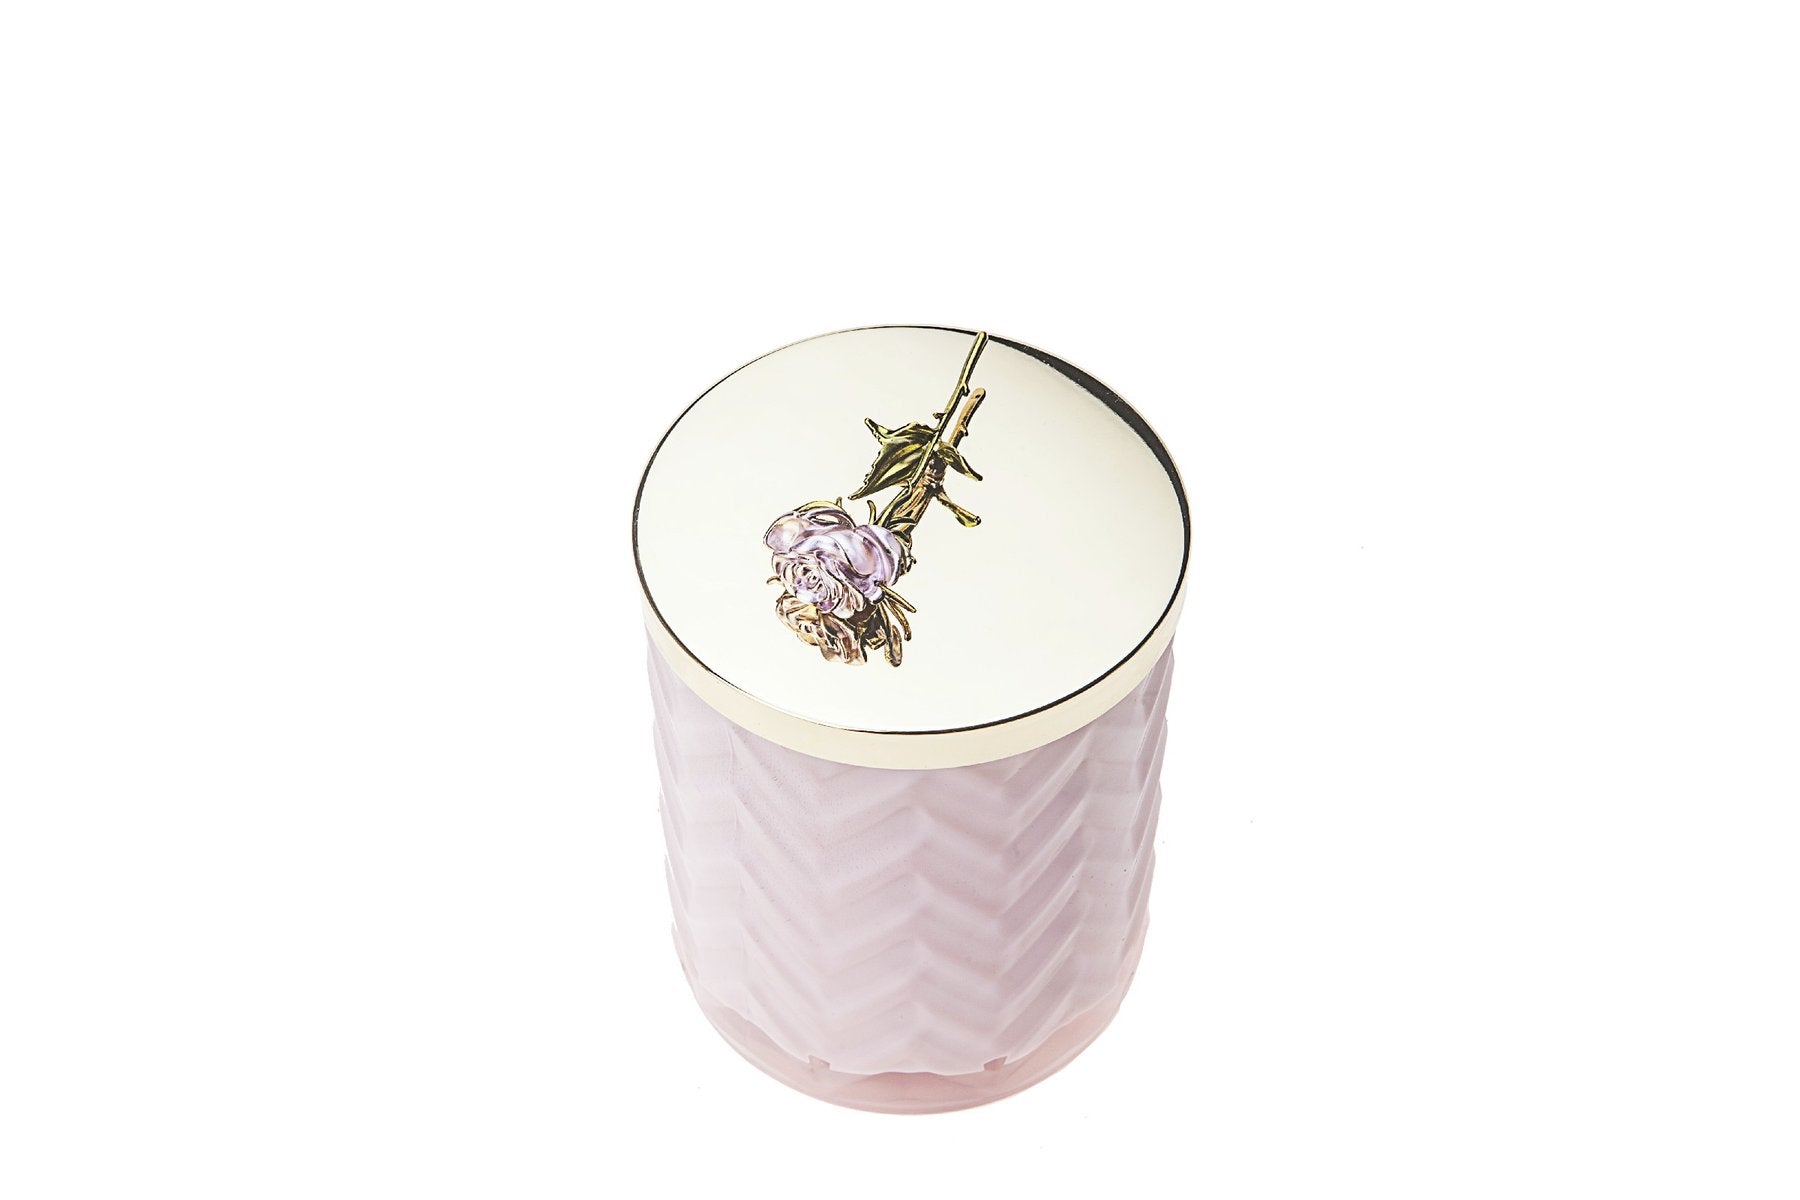 COTE NOIRE Herringbone Candle with Scarf - Pink Rose Lid